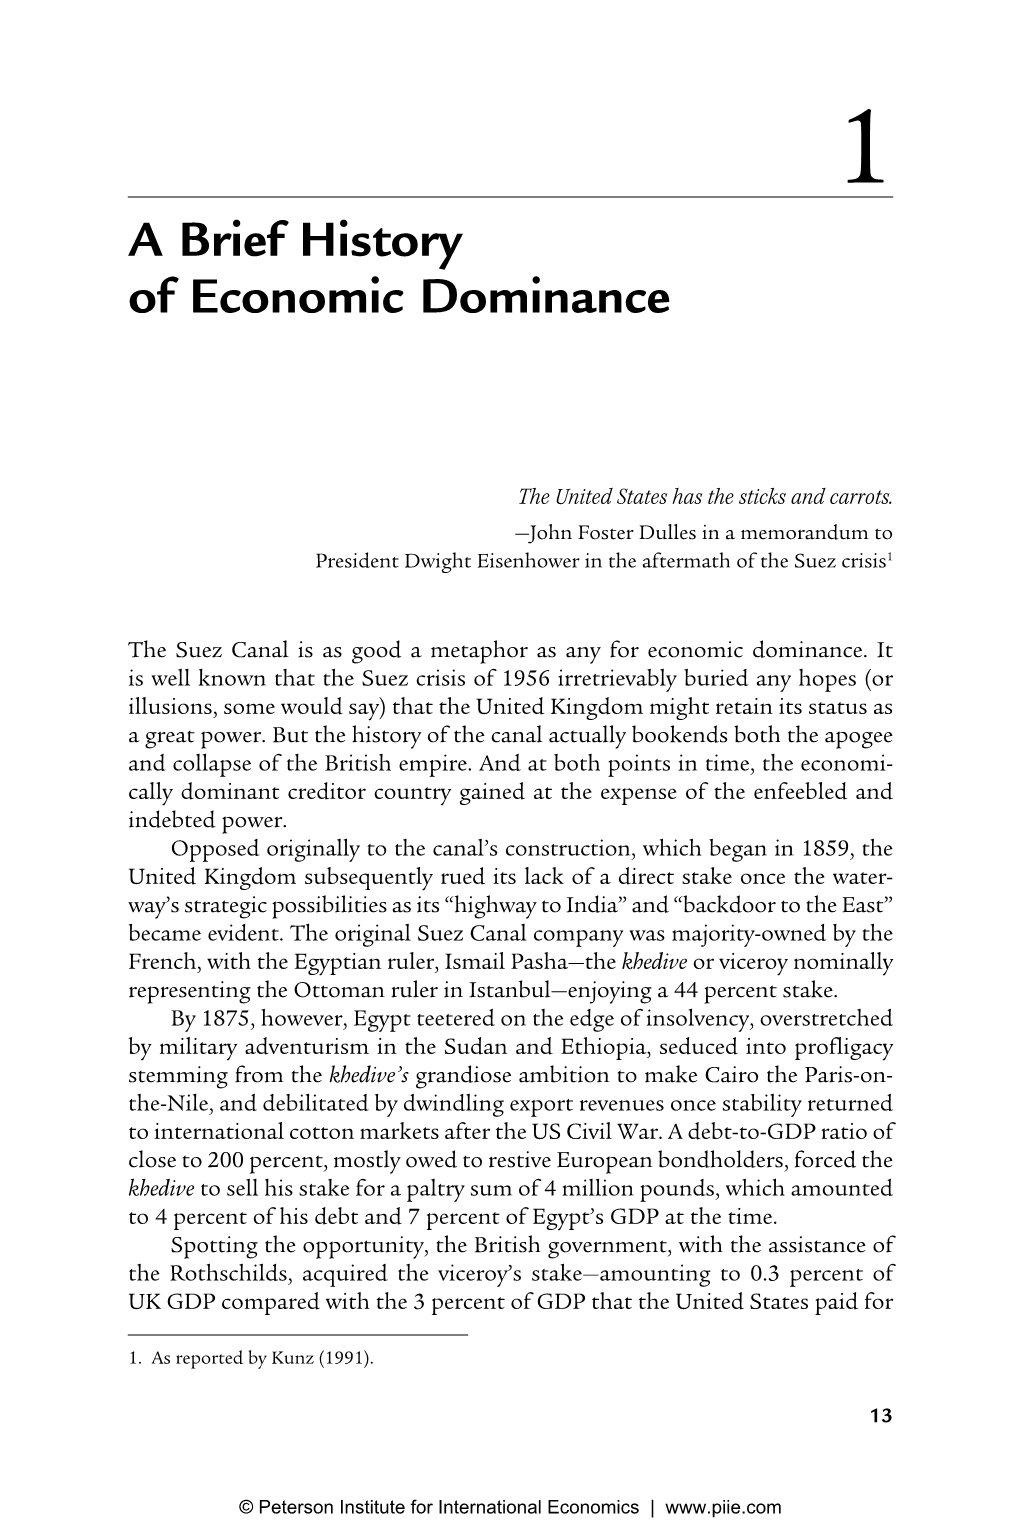 A Brief History of Economic Dominance